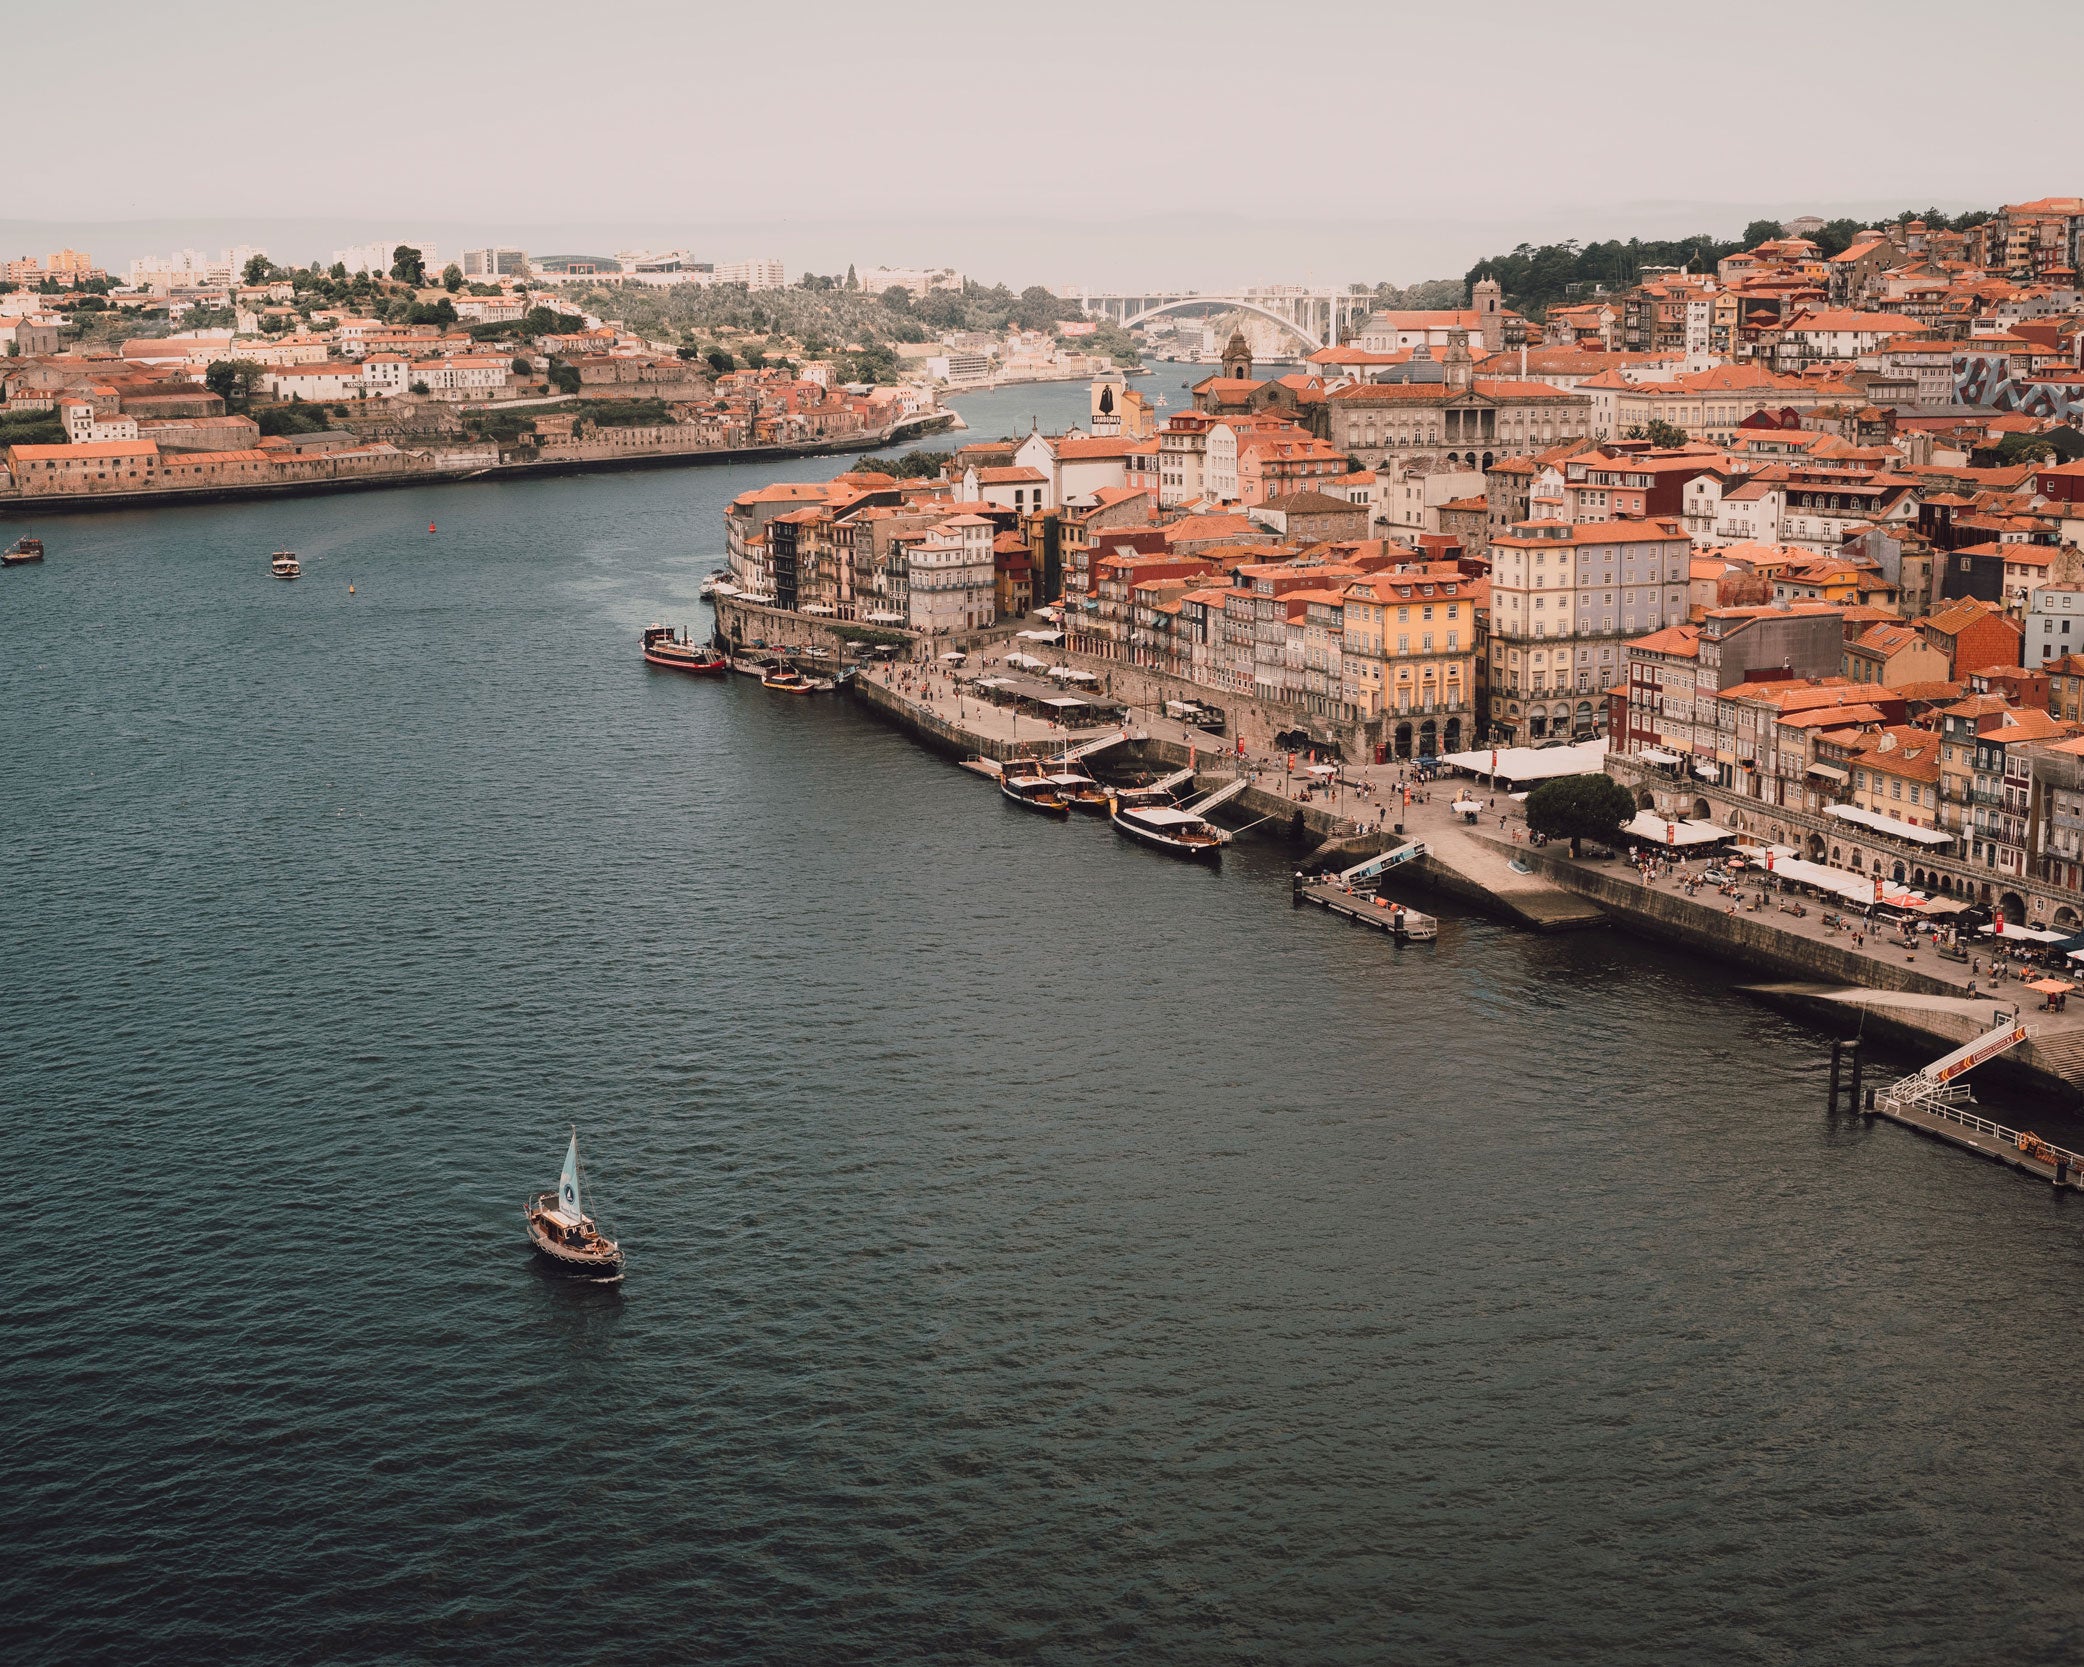 Travelling to Porto, on the banks of the Douro River